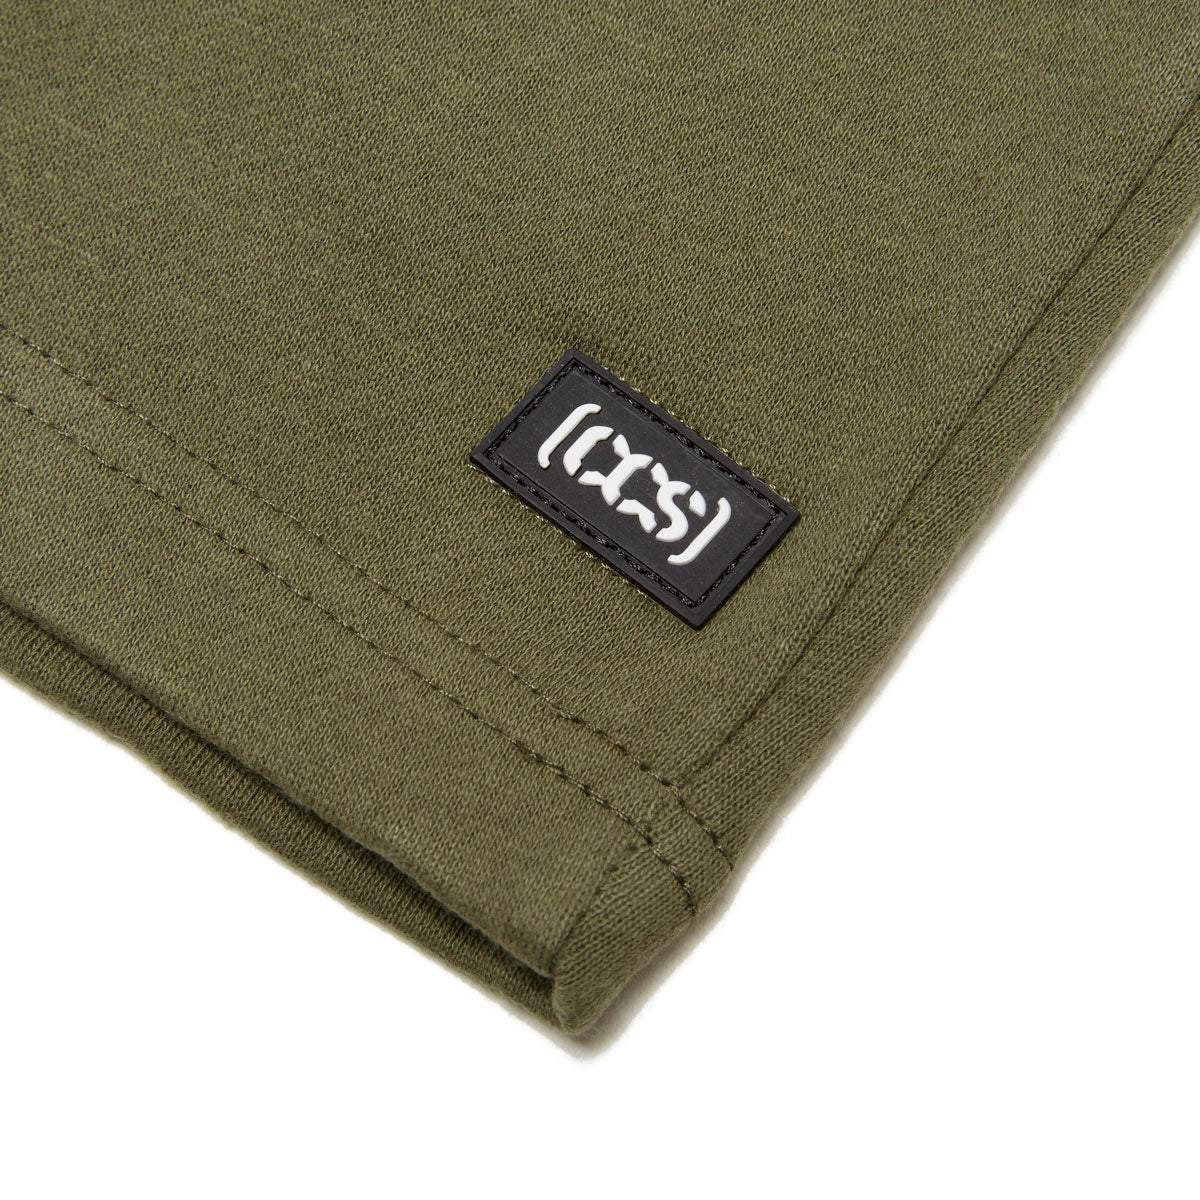 CCS Logo Rubber Patch Sweat Shorts - Army Green image 2